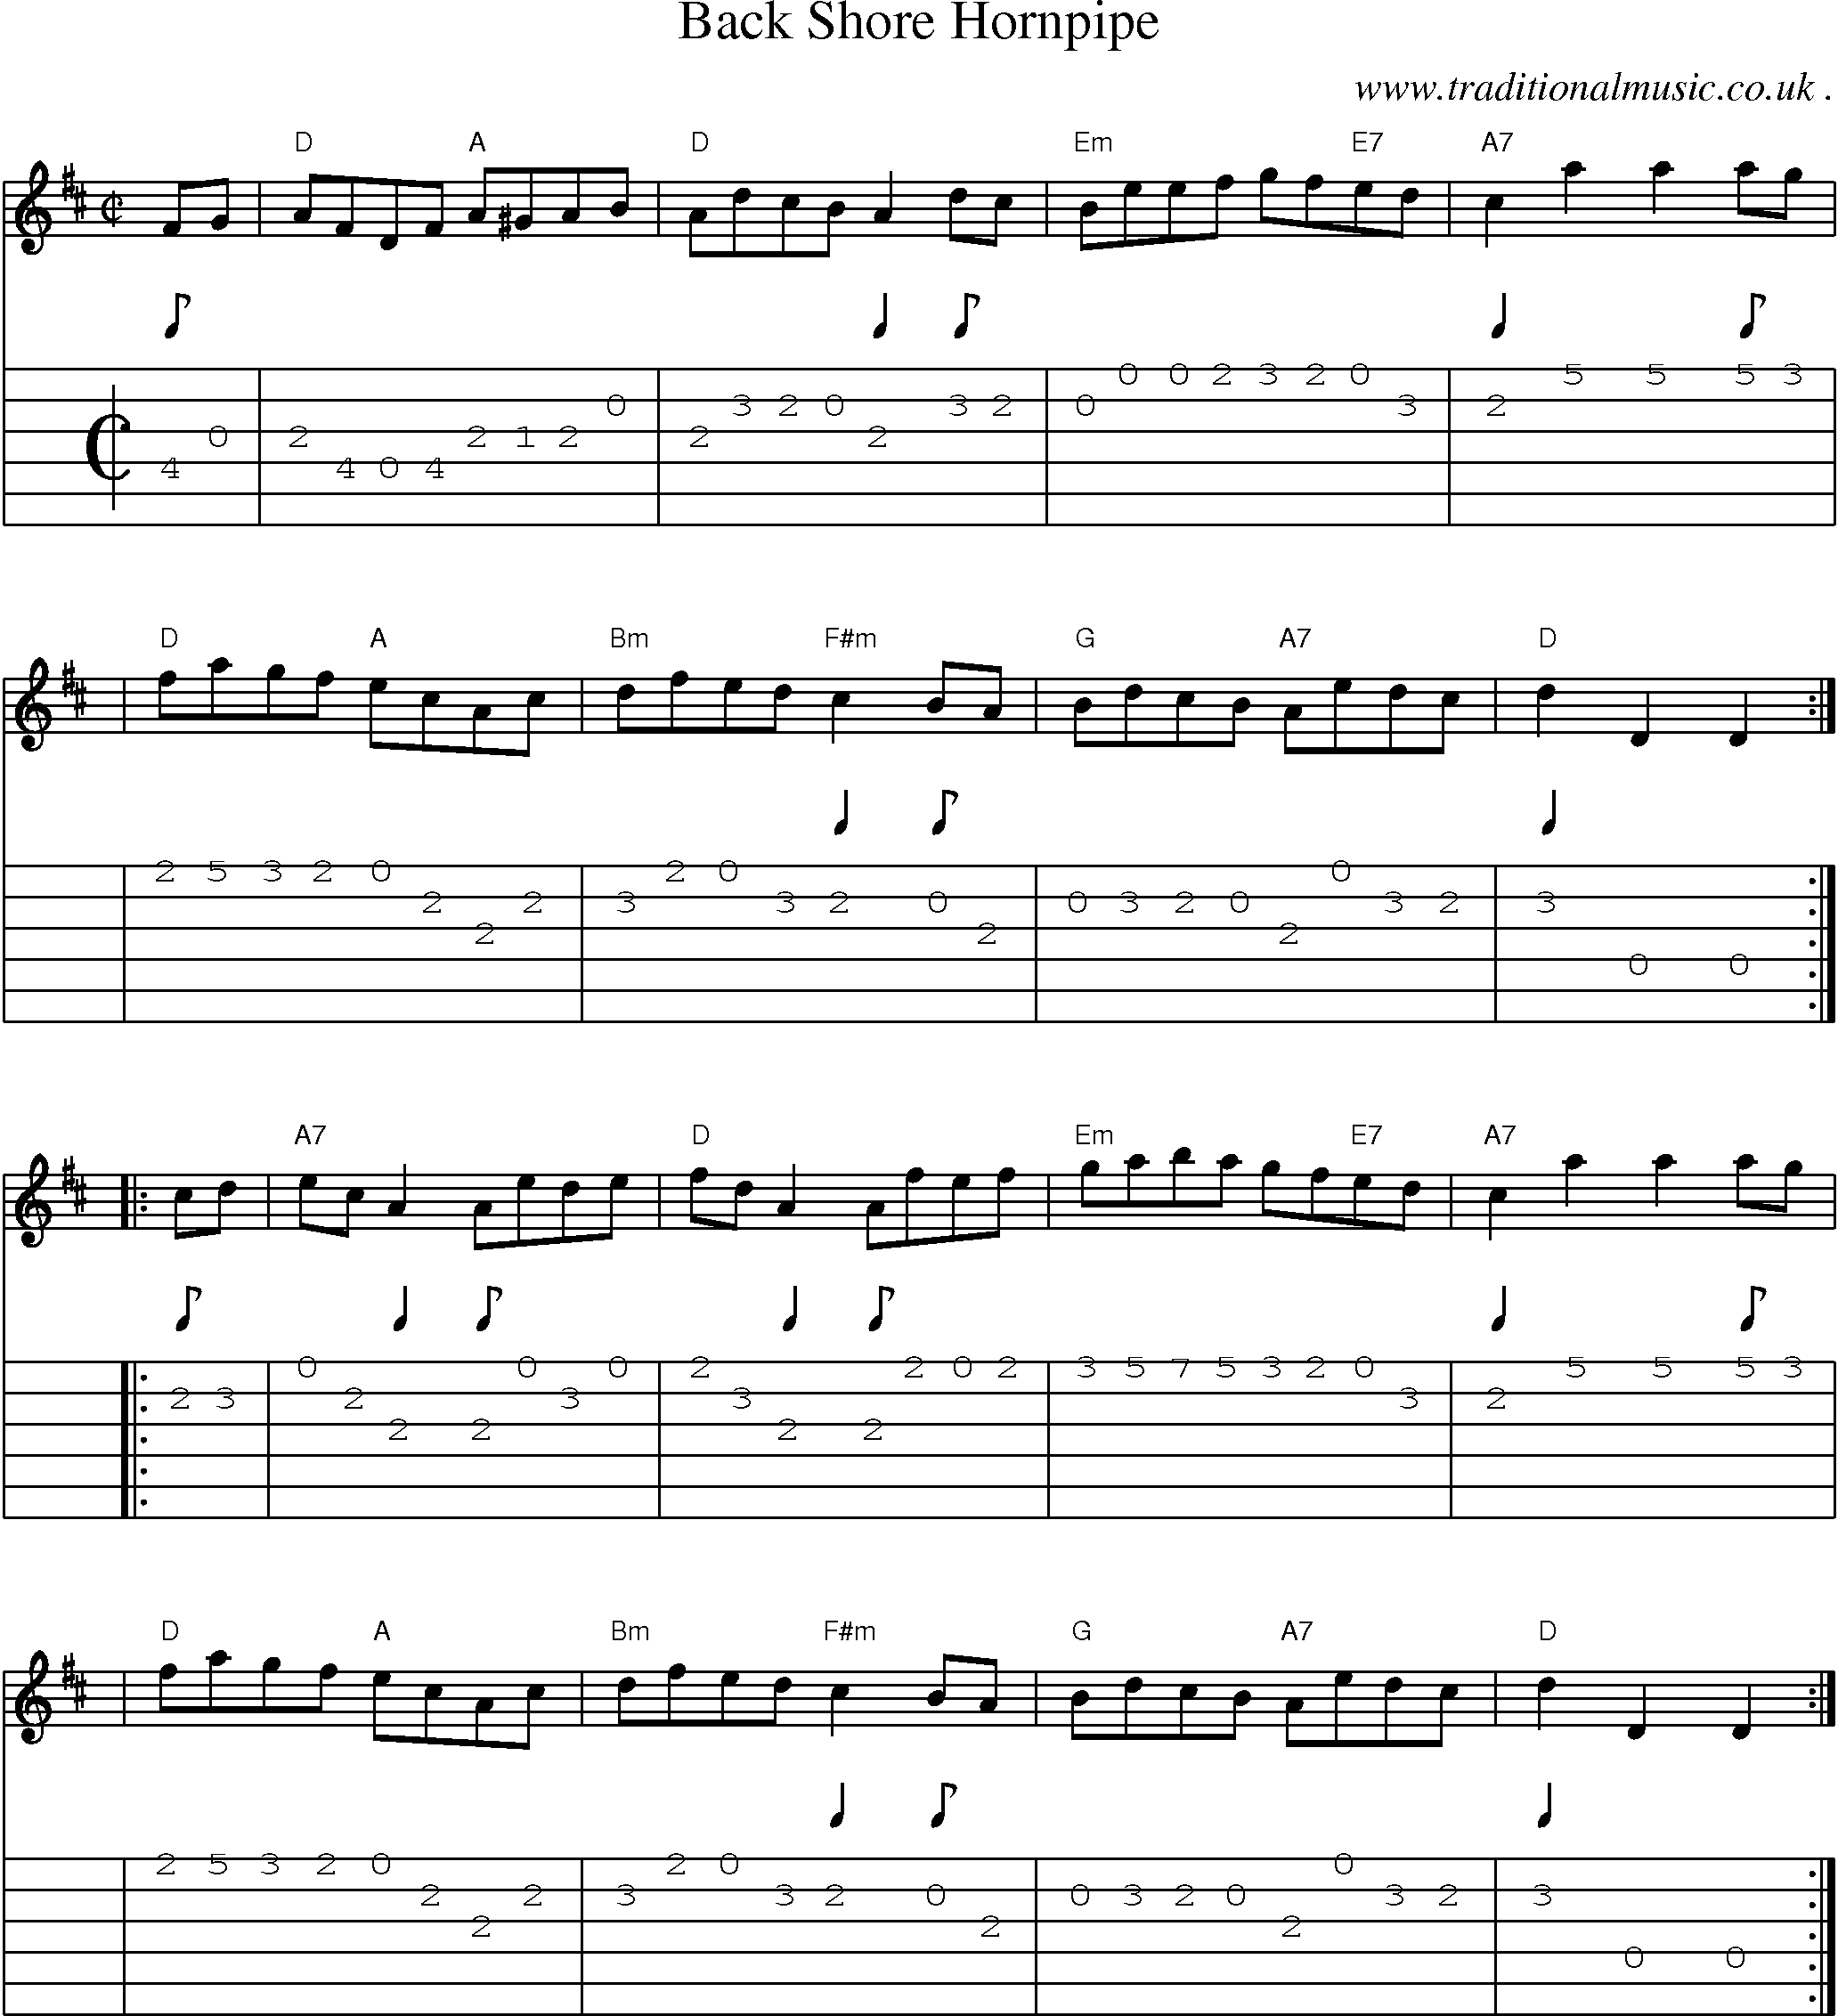 Sheet-music  score, Chords and Guitar Tabs for Back Shore Hornpipe